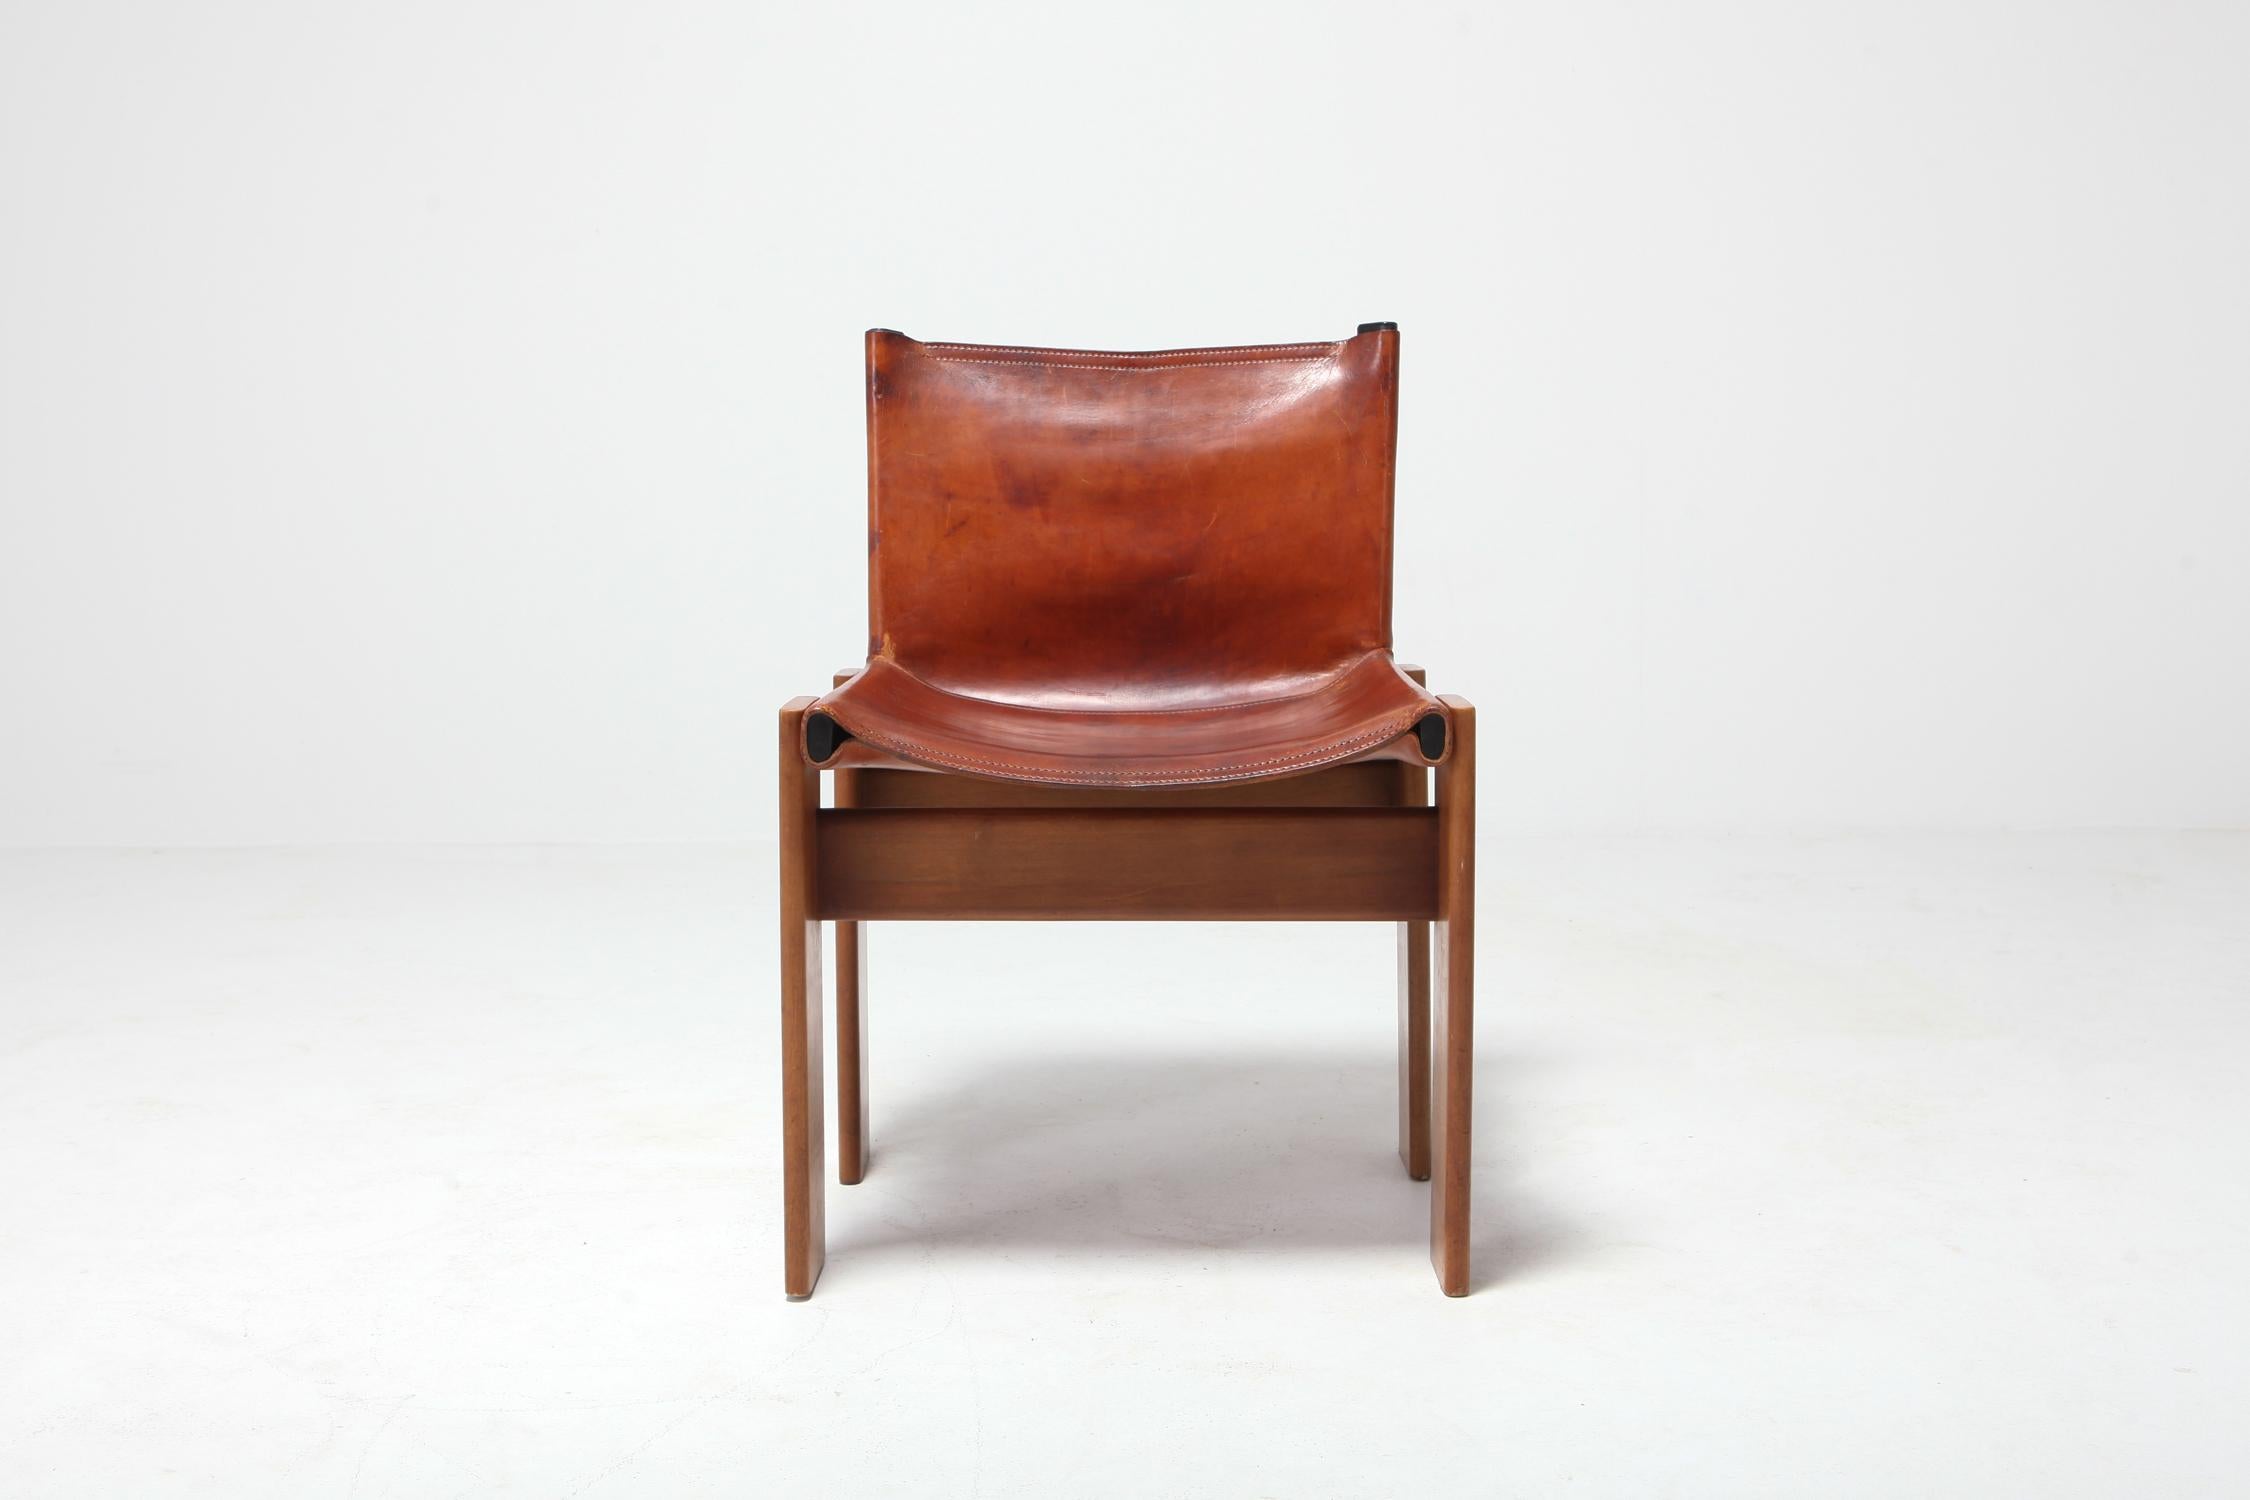 20th Century Scarpa 'Monk' Chairs in Patinated Cognac Leather, Set of Four